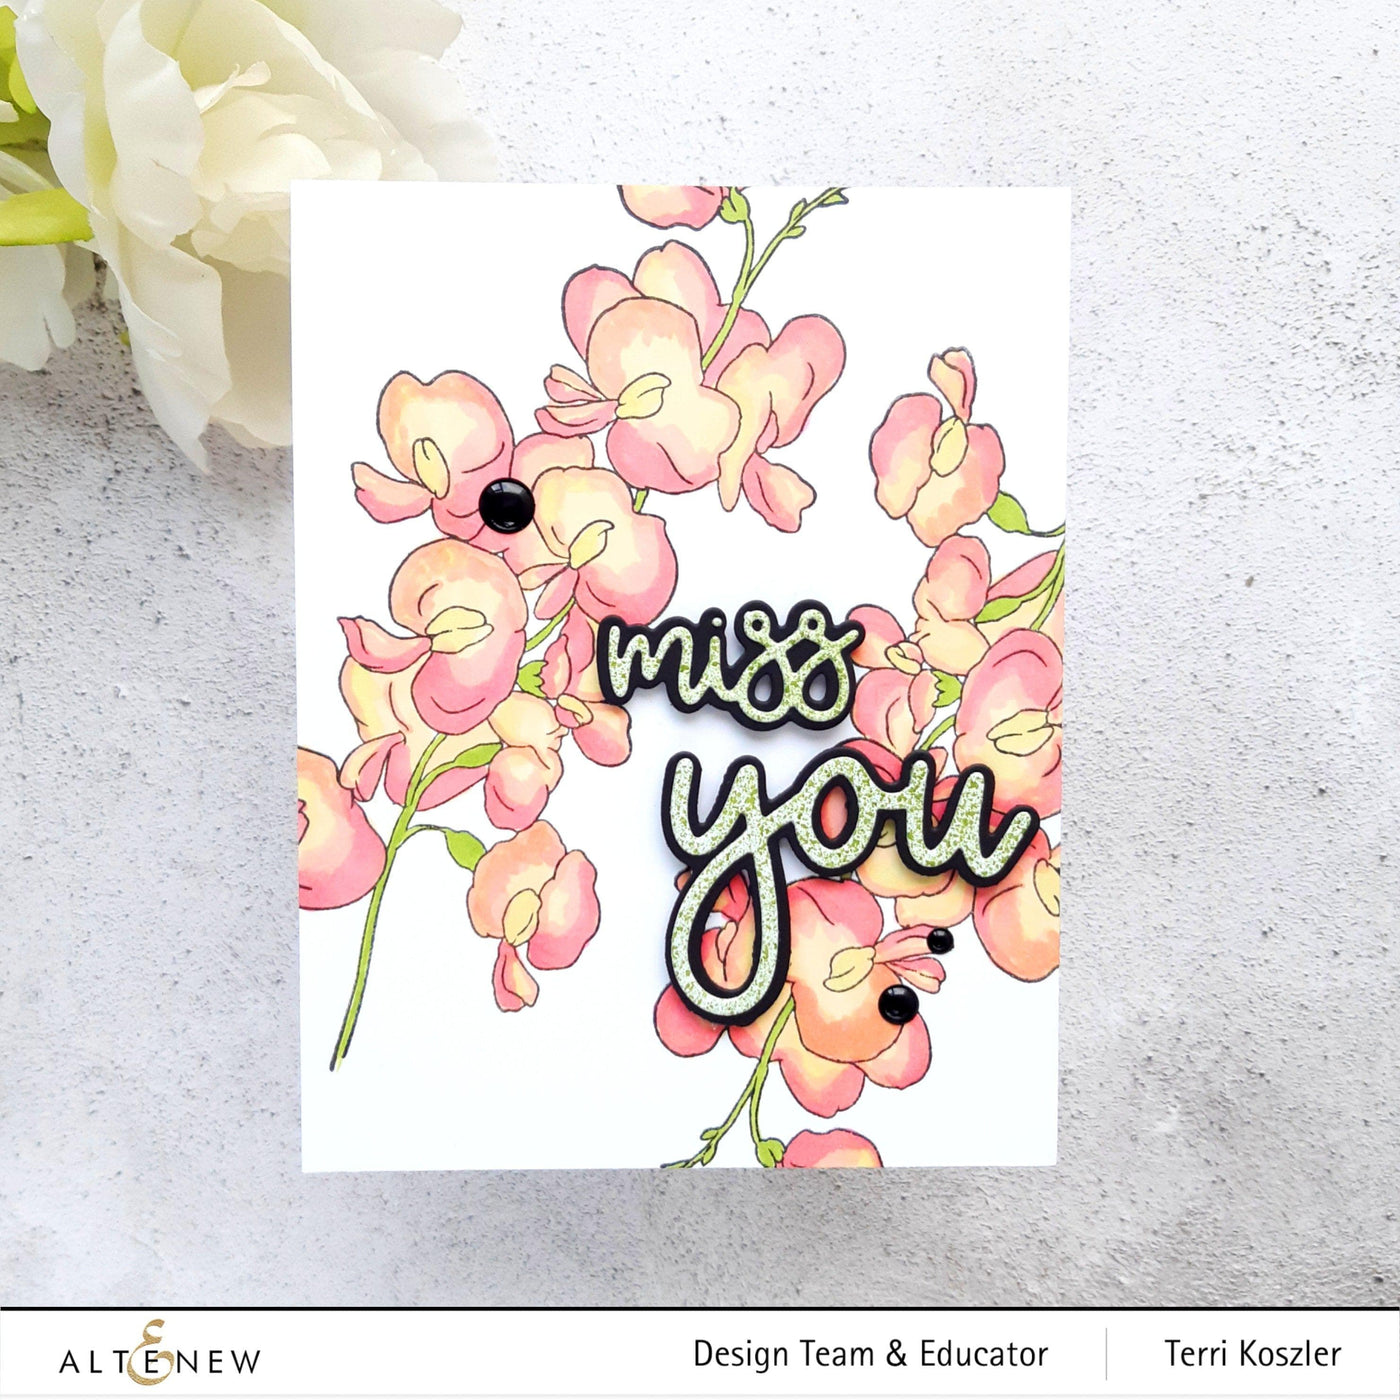 Photocentric Clear Stamps Paint-A-Flower: Sweet Pea Outline Stamp Set